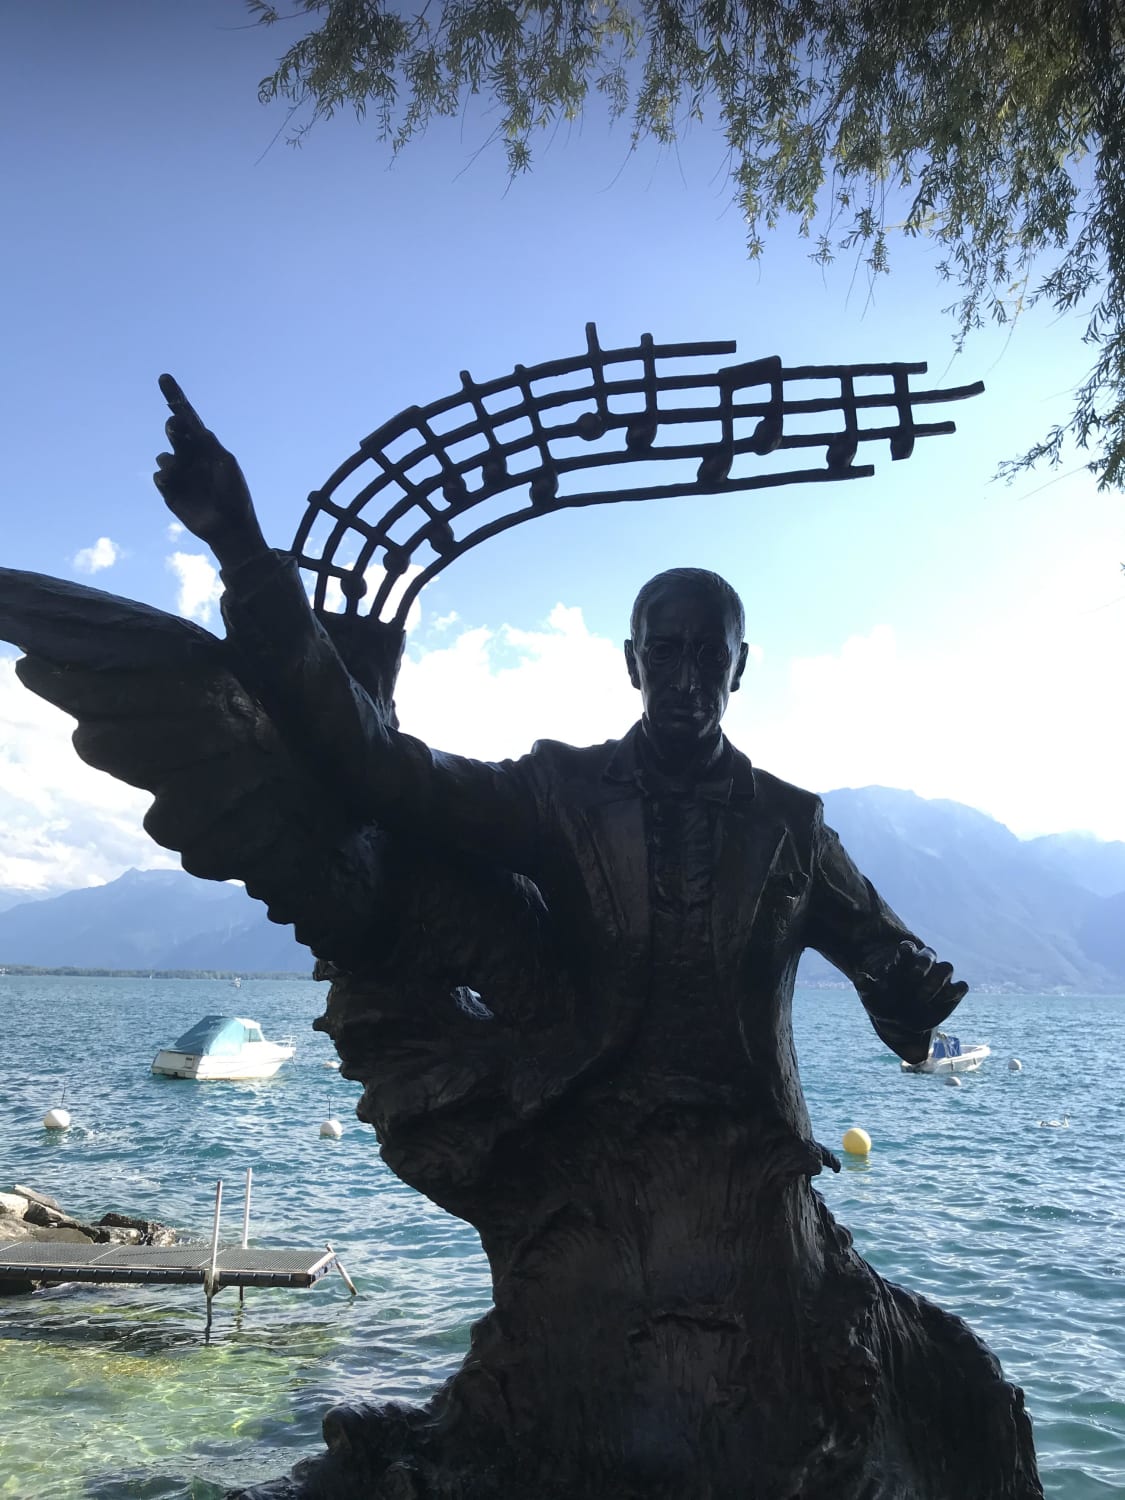 Anyone know where this melody comes from? (Stravinsky Statue Montreux, Switzerland)